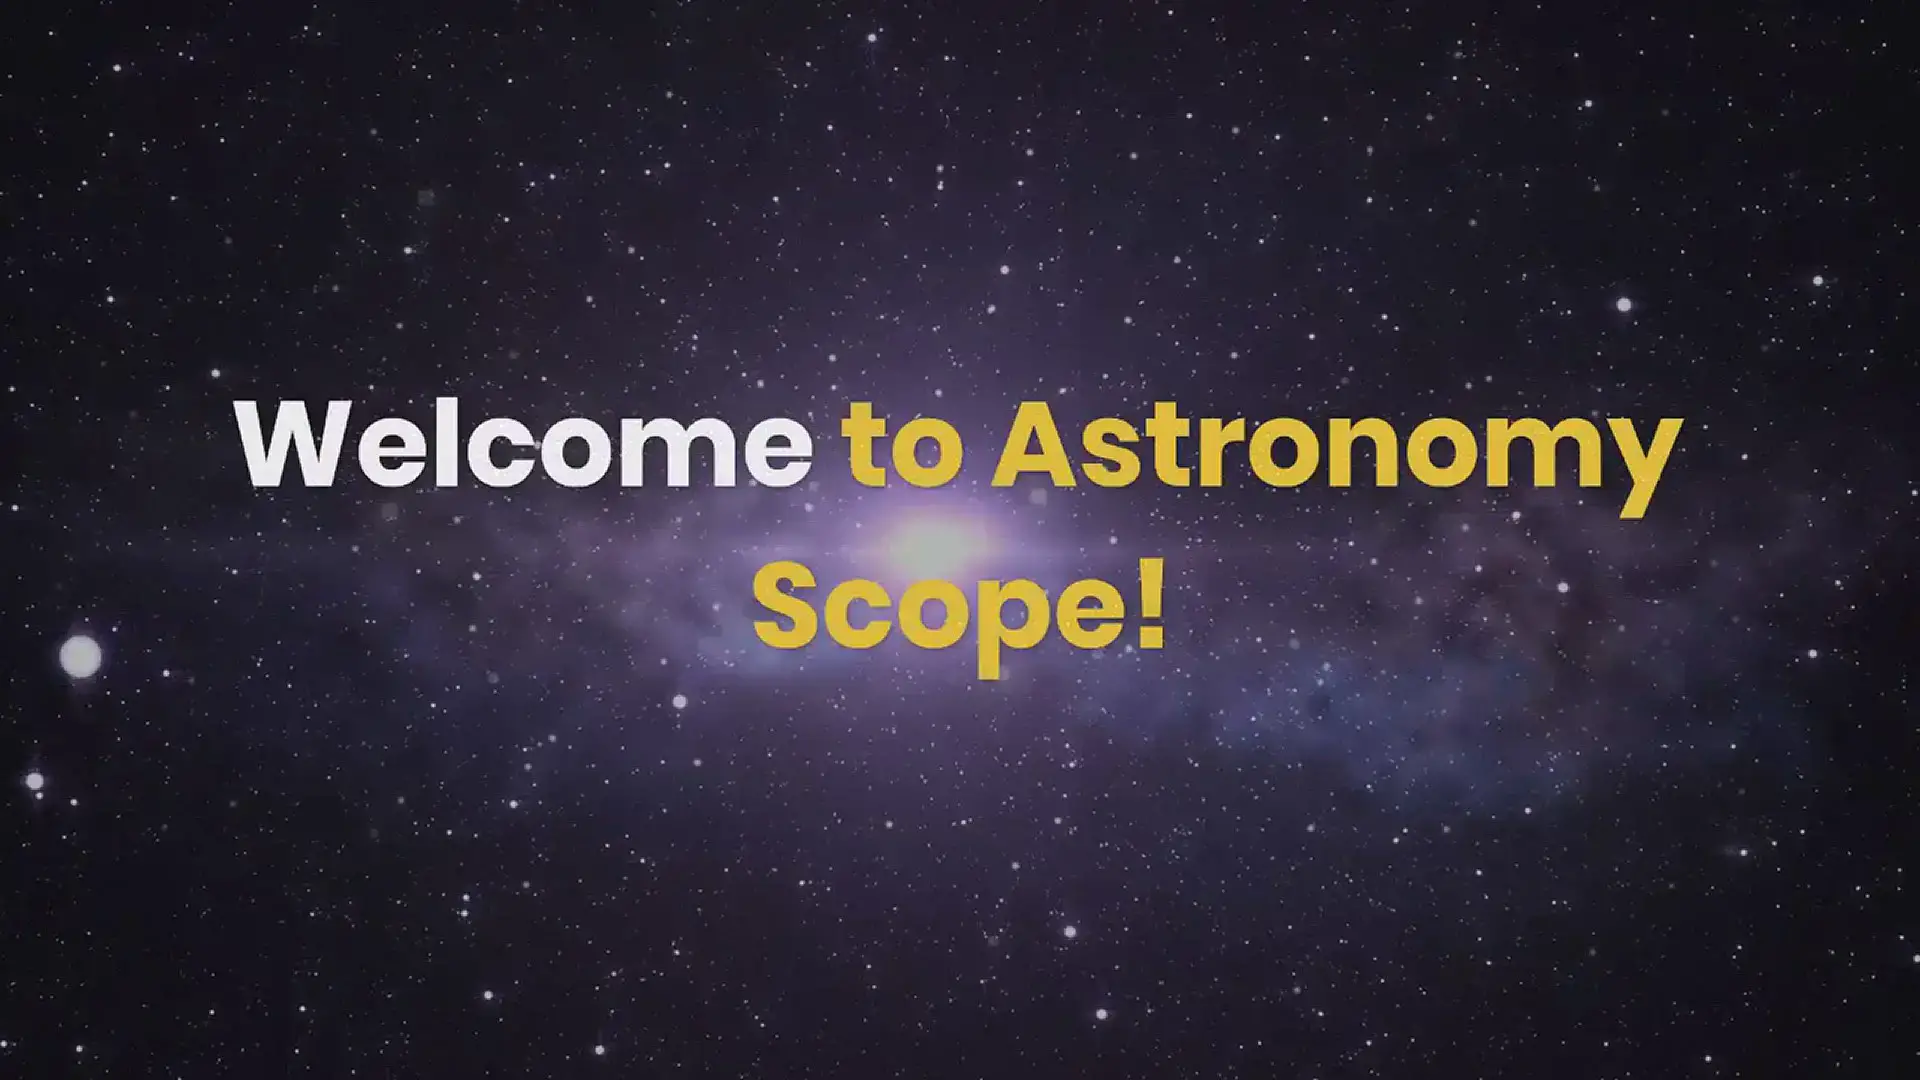 'Video thumbnail for Astronomy Scope'